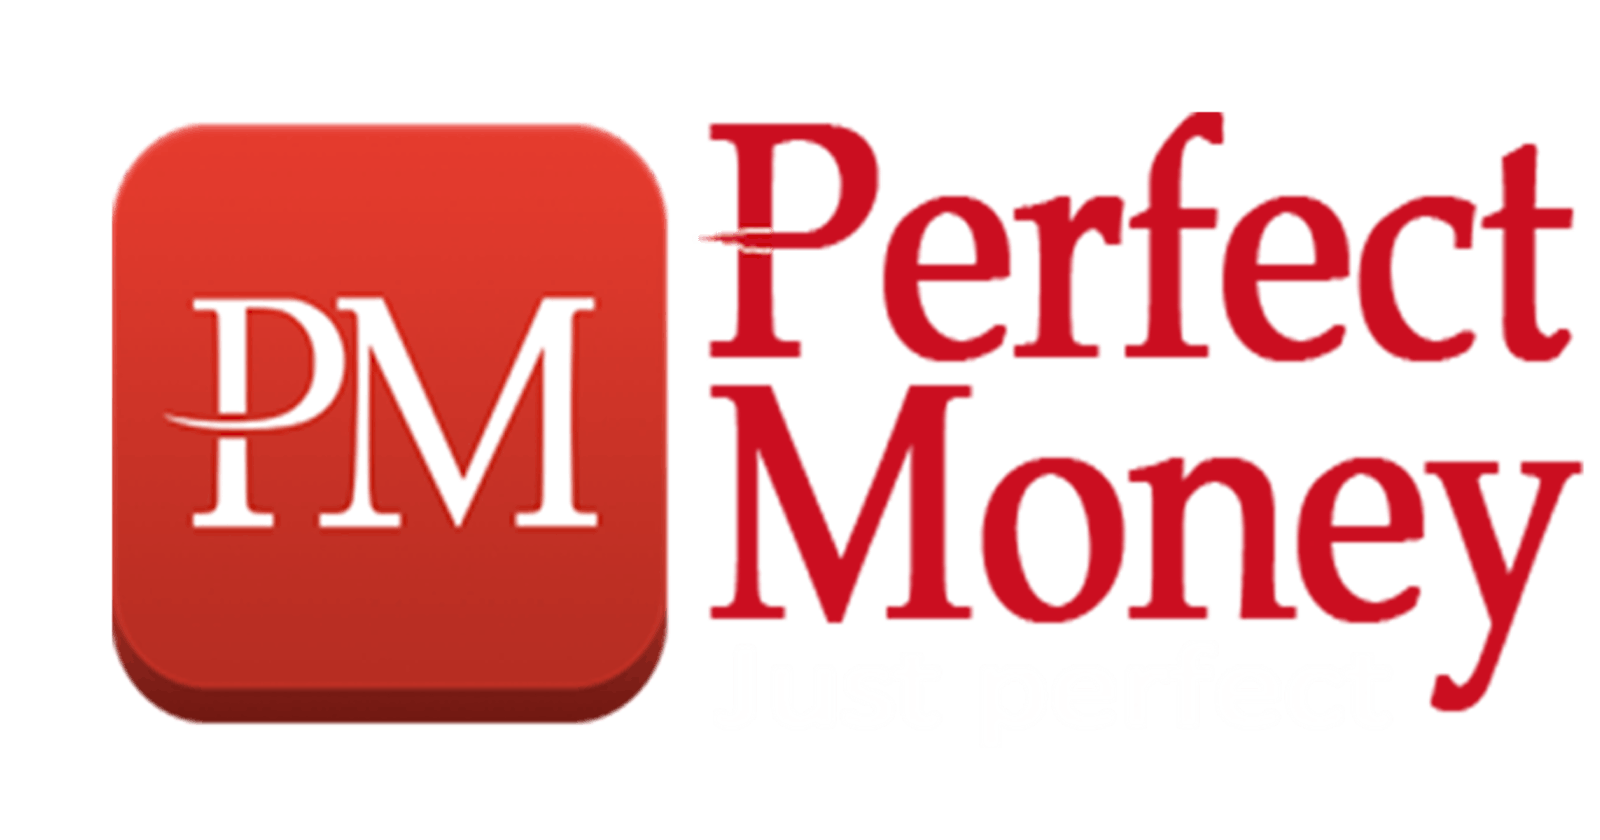 Perfect Money Review: Features, Fees, and How It Works